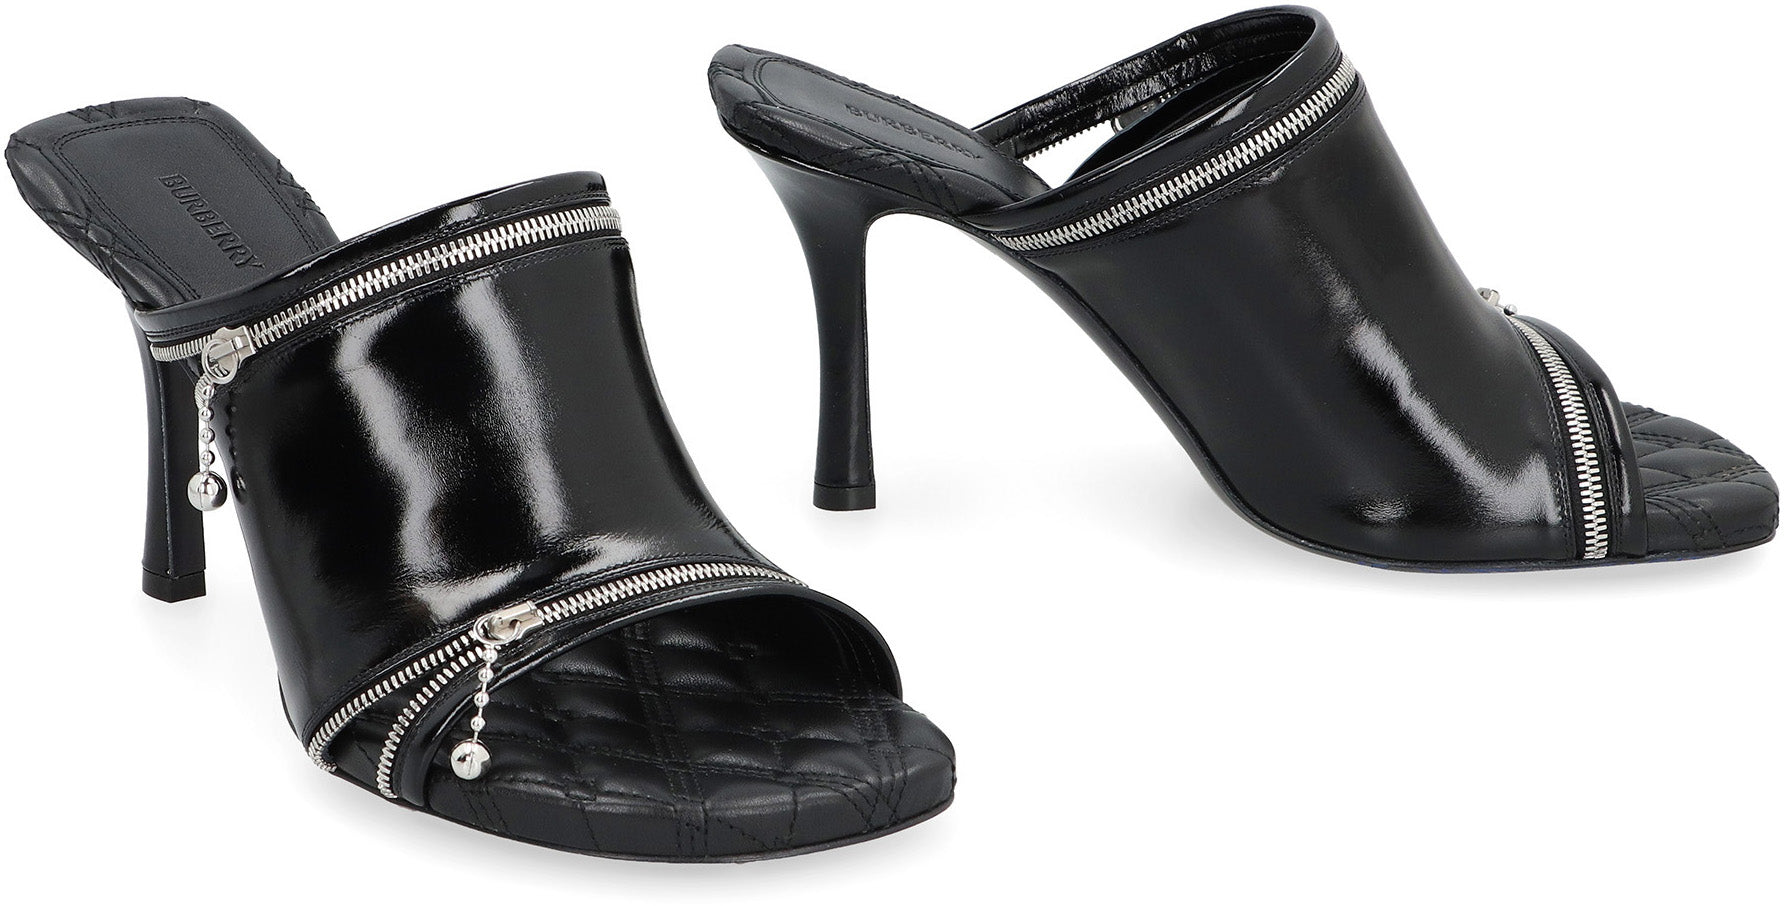 Shop Burberry Black Shiny Leather Square Toe Sandal With Decorative Zips, High Stiletto Heel, Equestrian Logo Inso